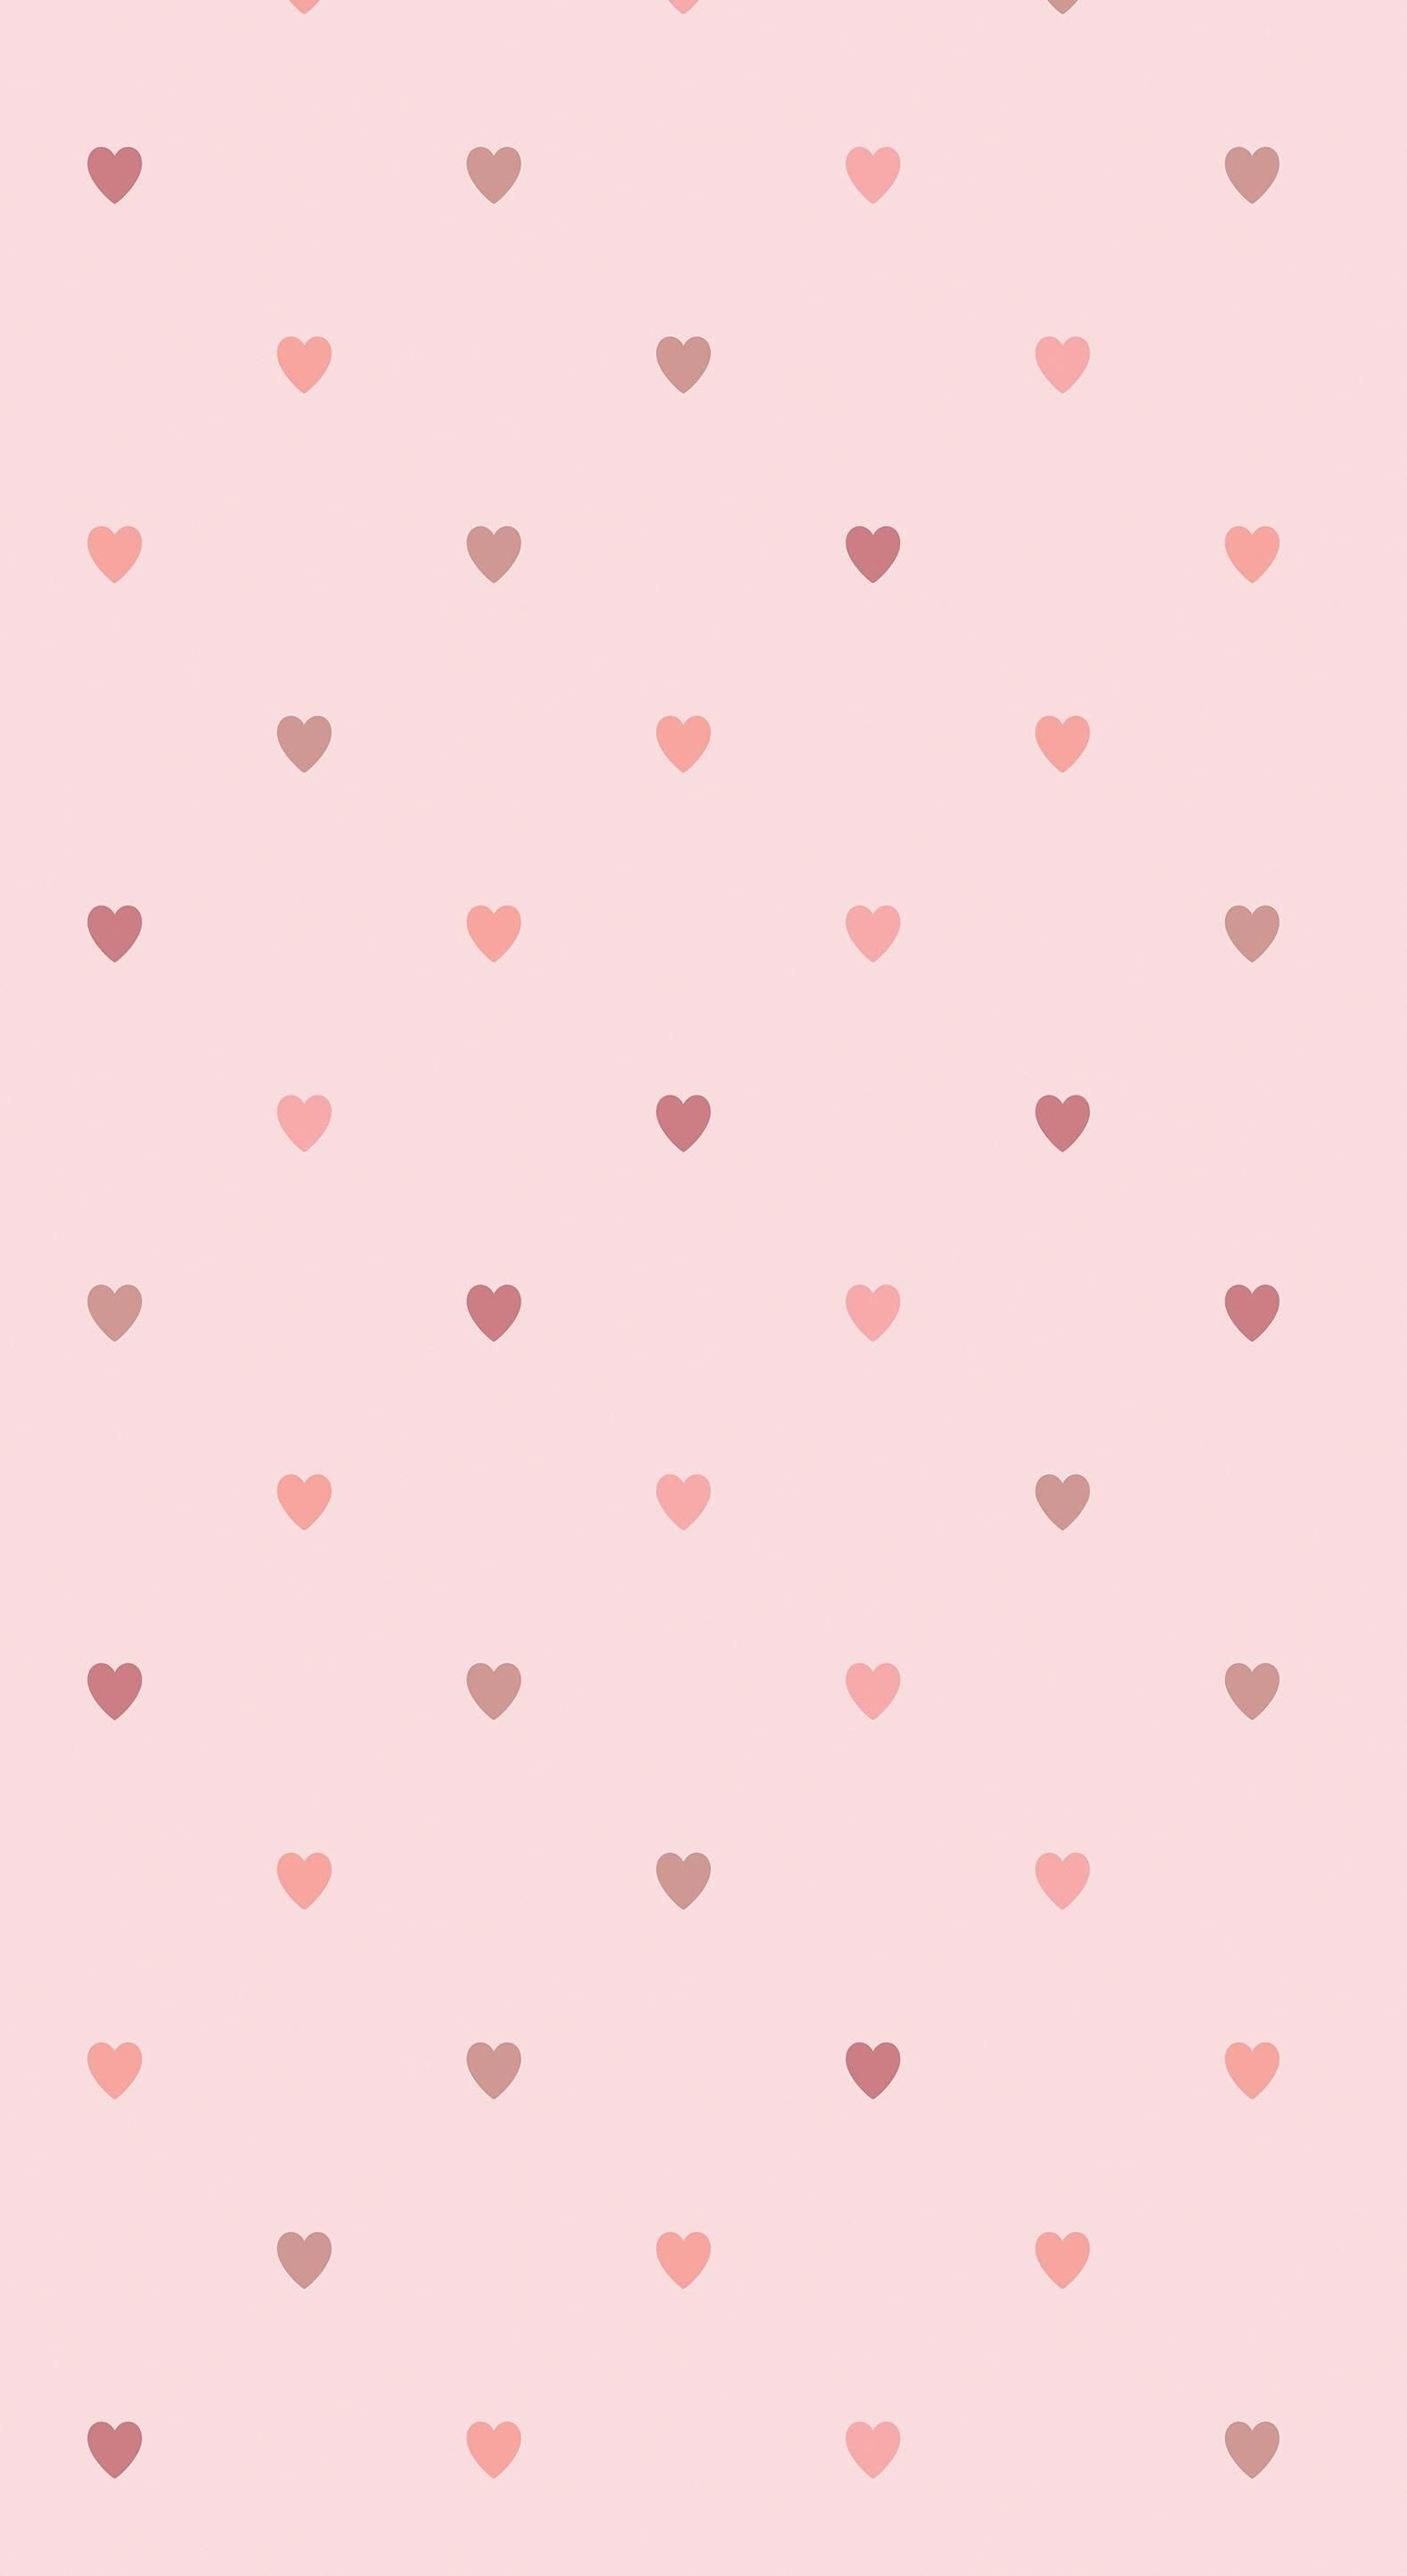 A pink background with small hearts - Heart, pink heart, profile picture